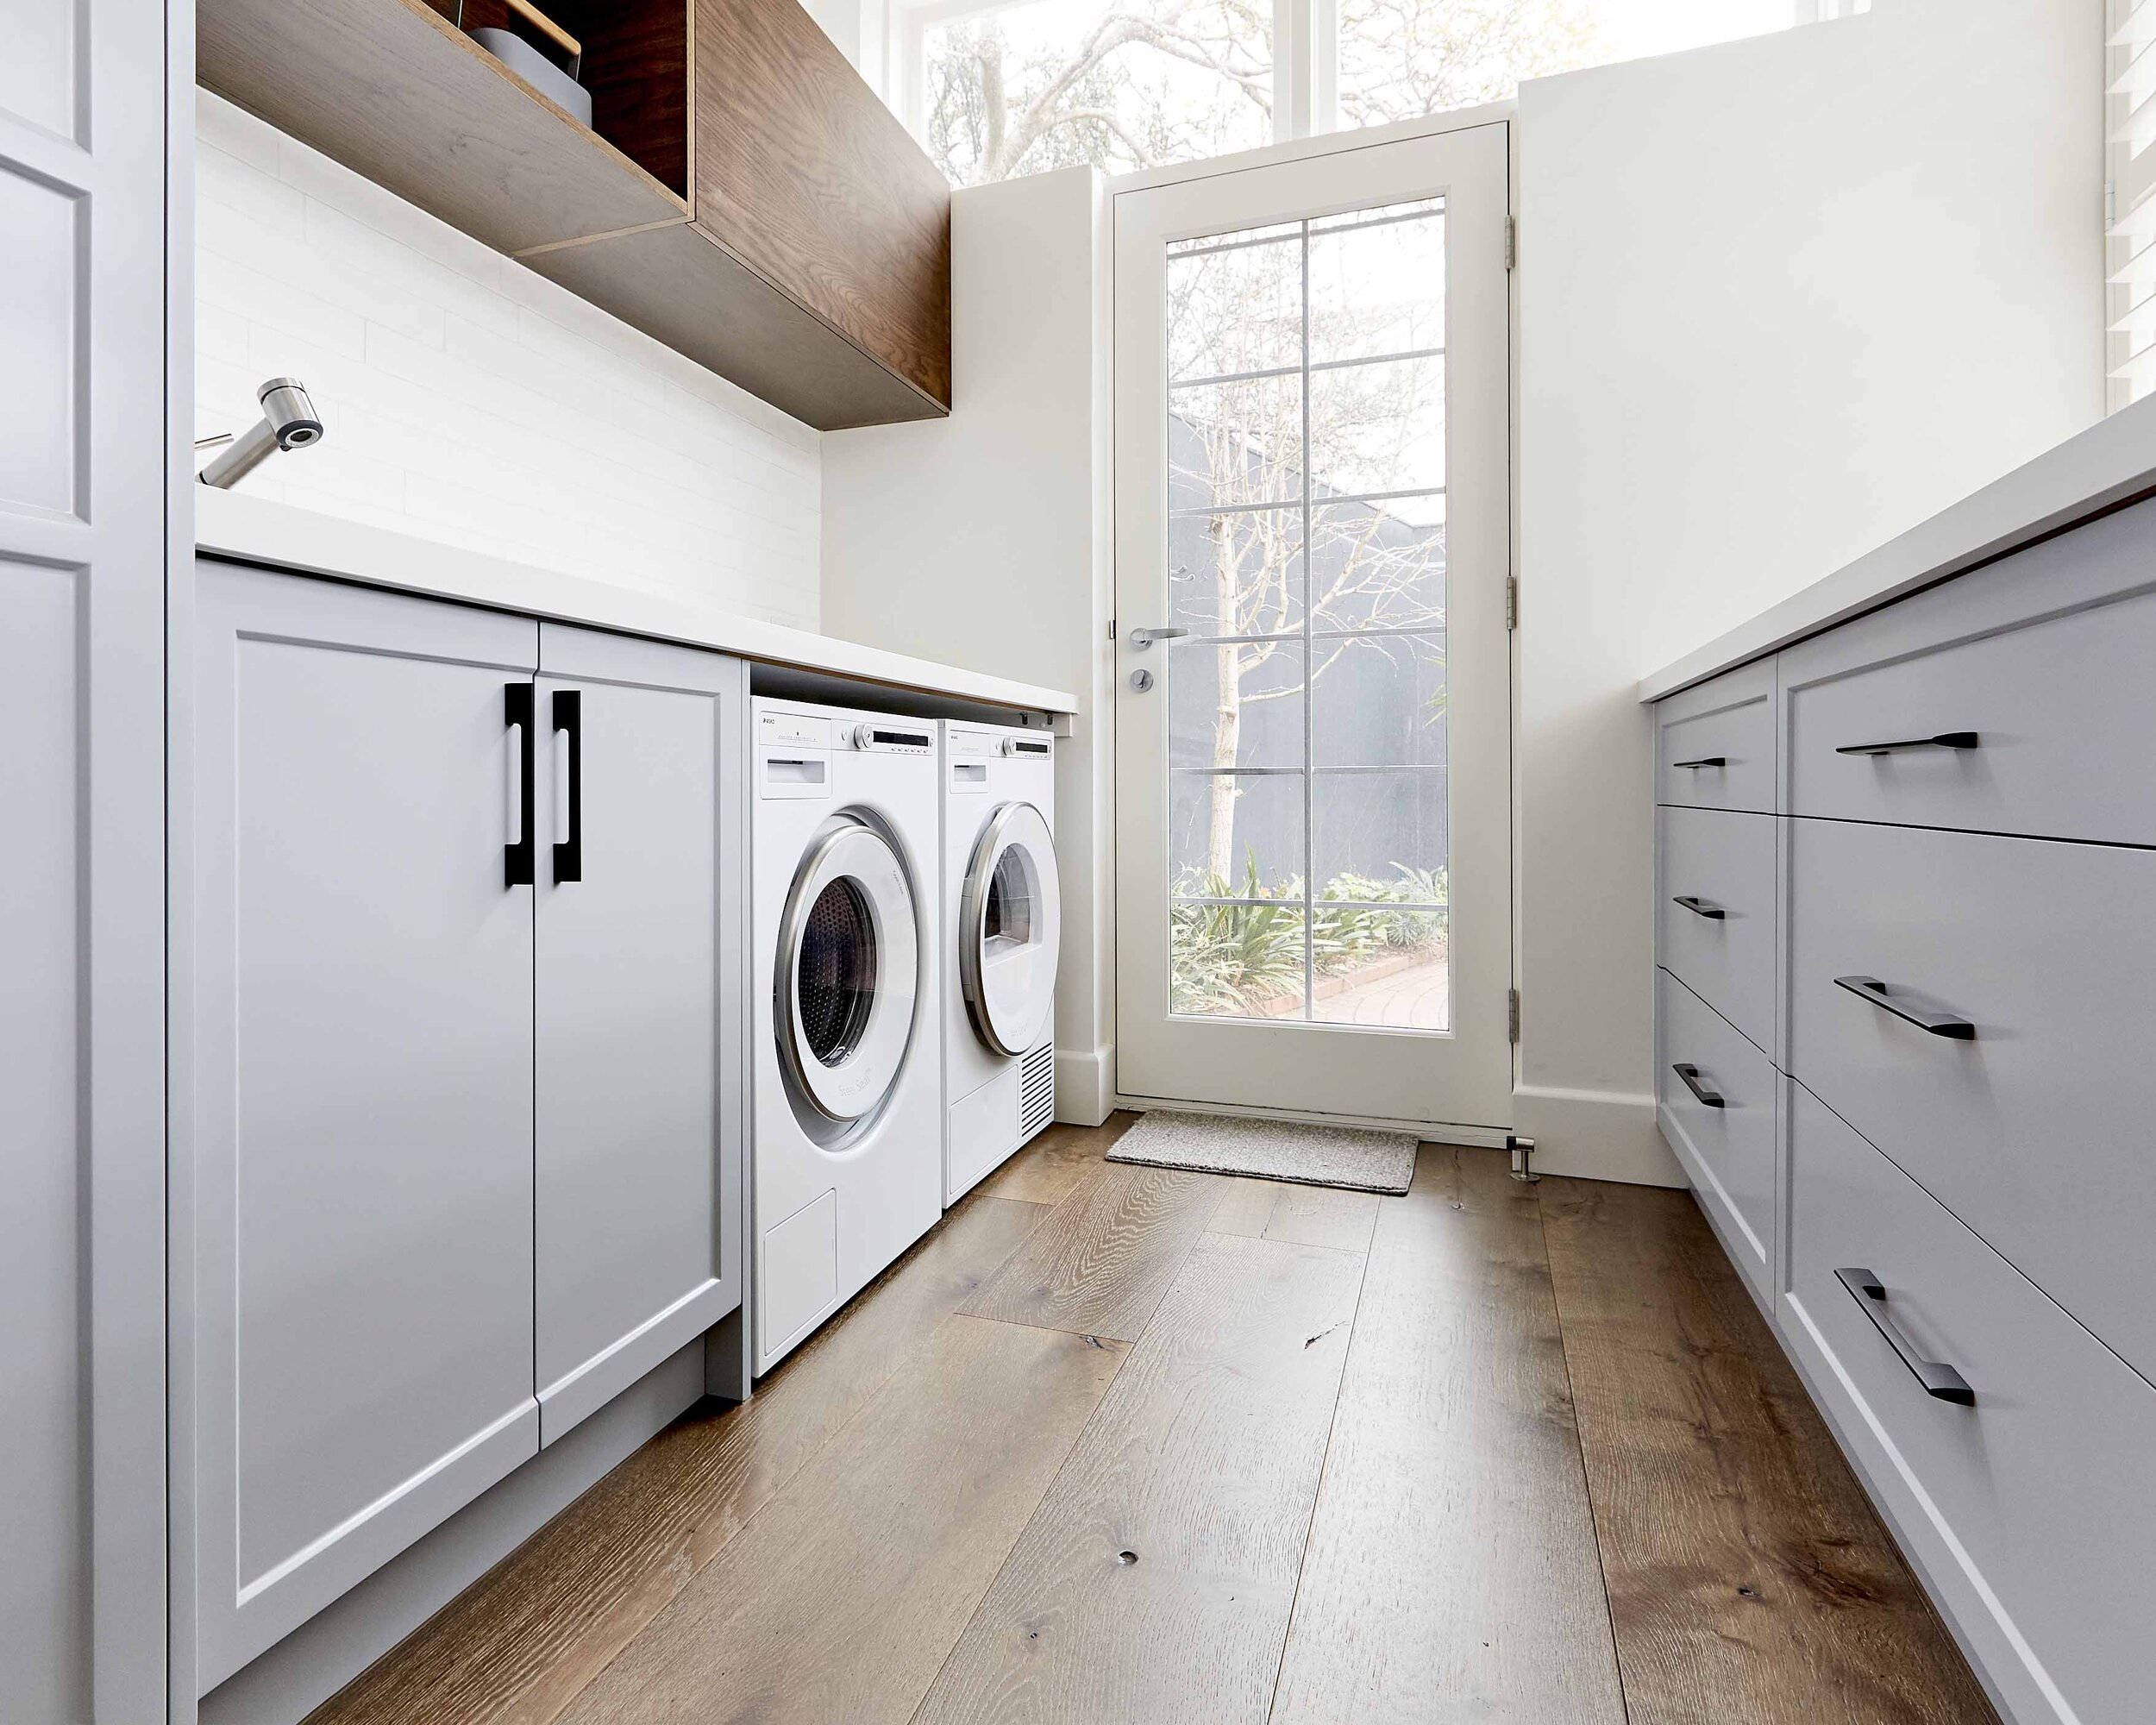  Shaker style laundry cabinetry 